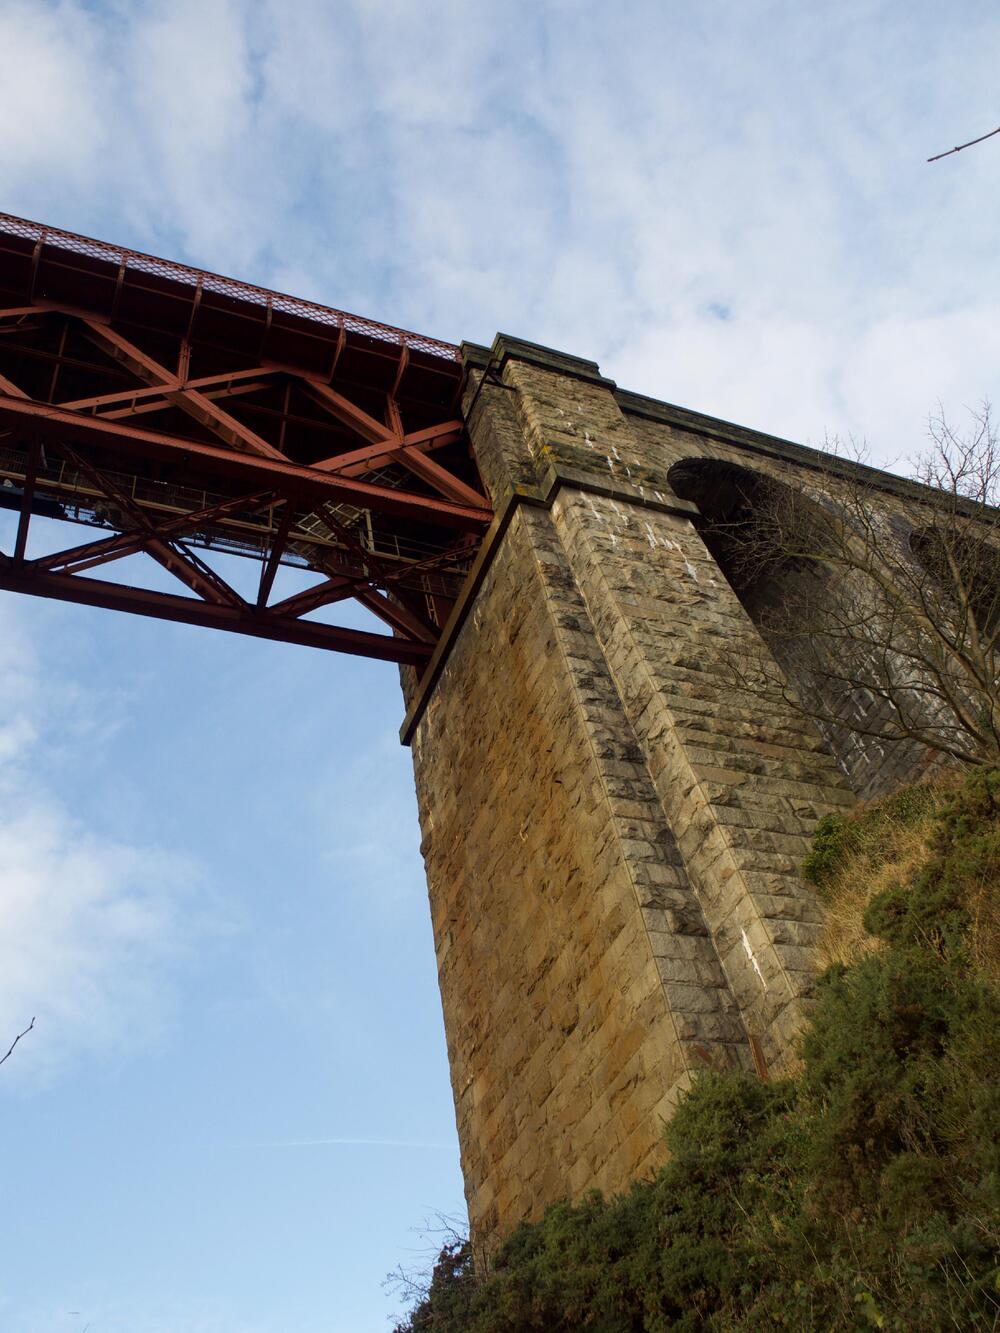 A yellowish-coloured stone viaduct, with the red girders of the bridge atop it.